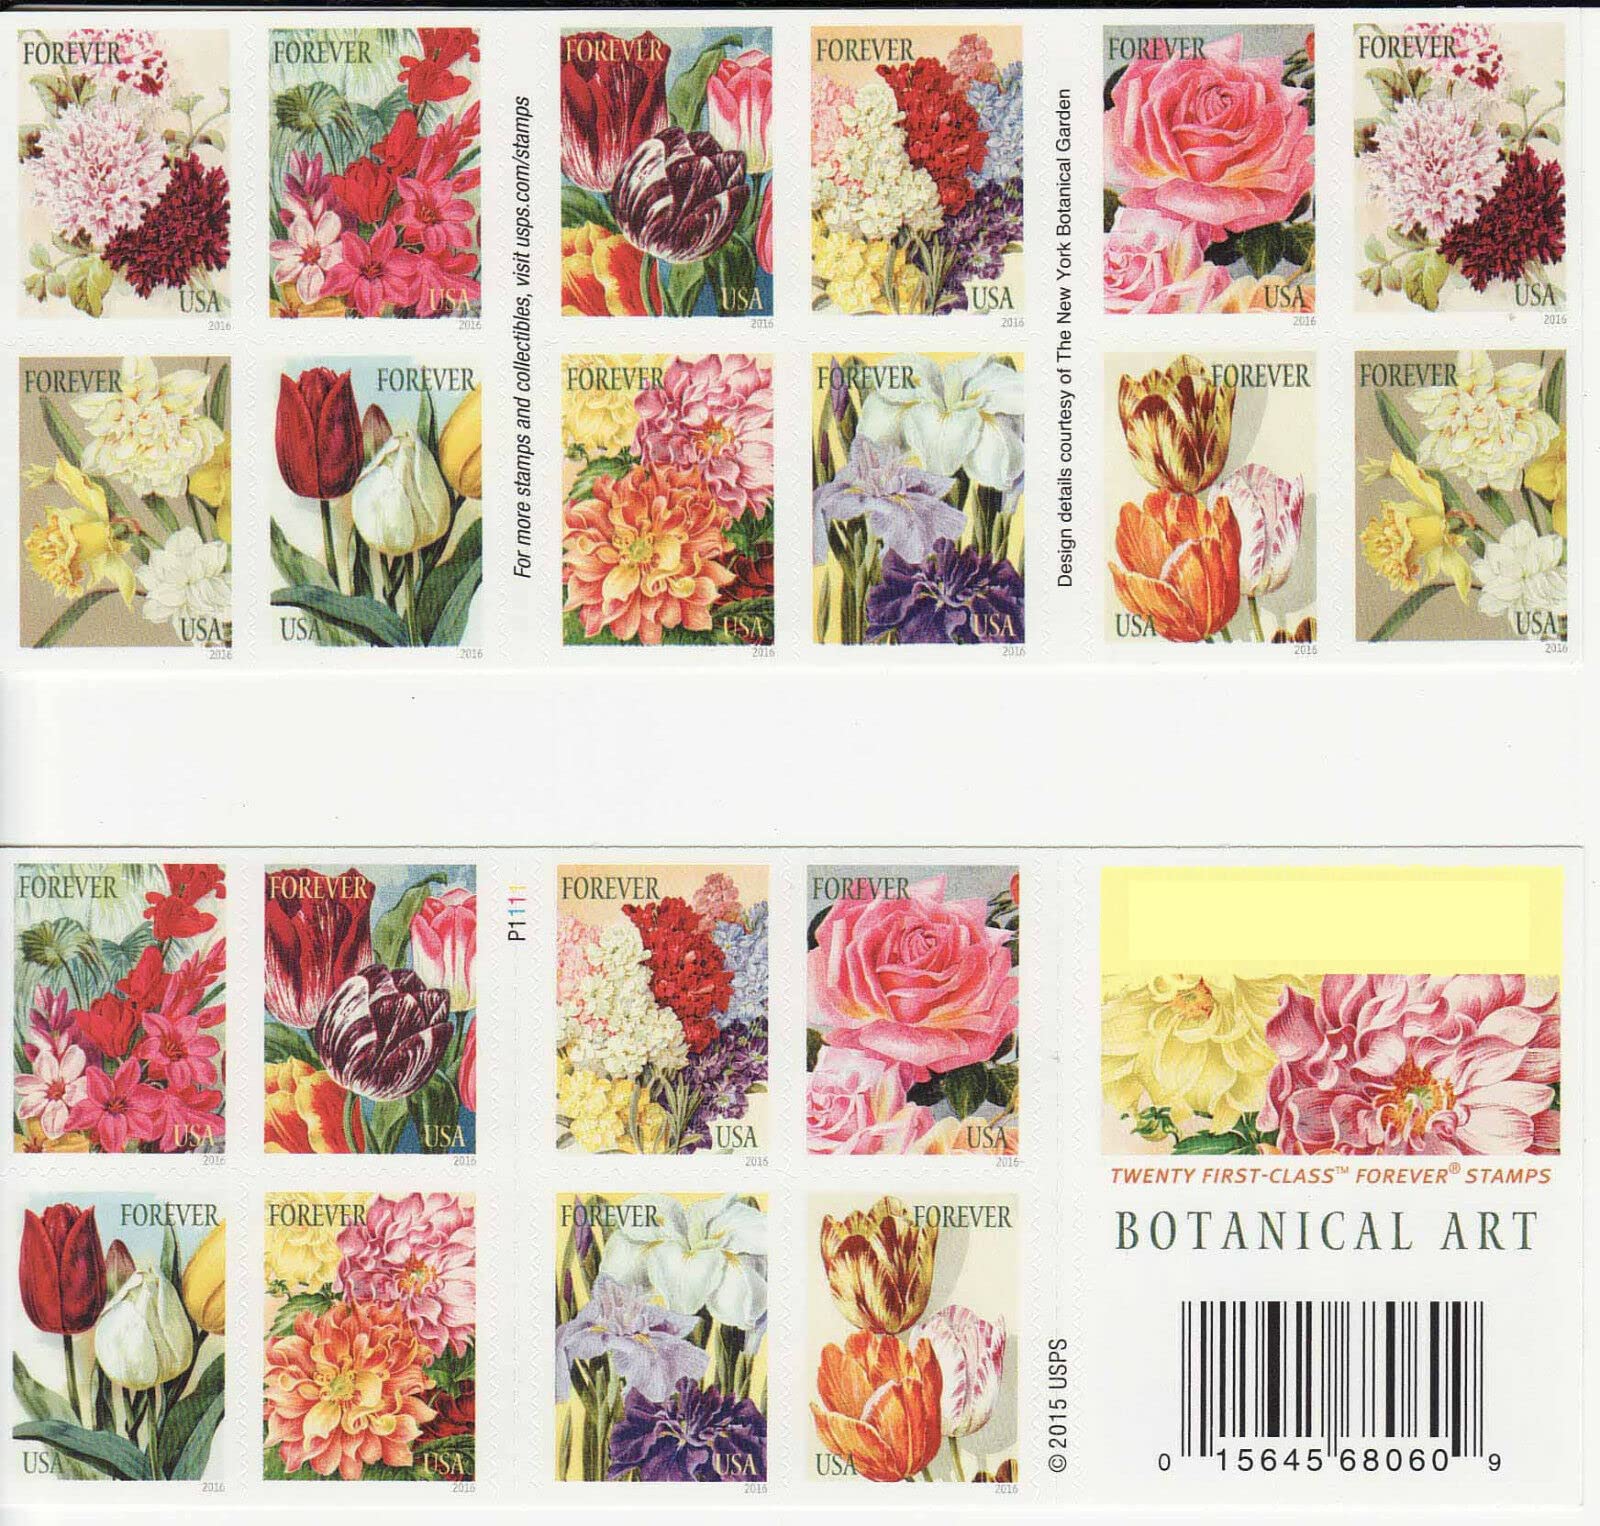 2016 Botanical Art Forever First Class Postage Stamps